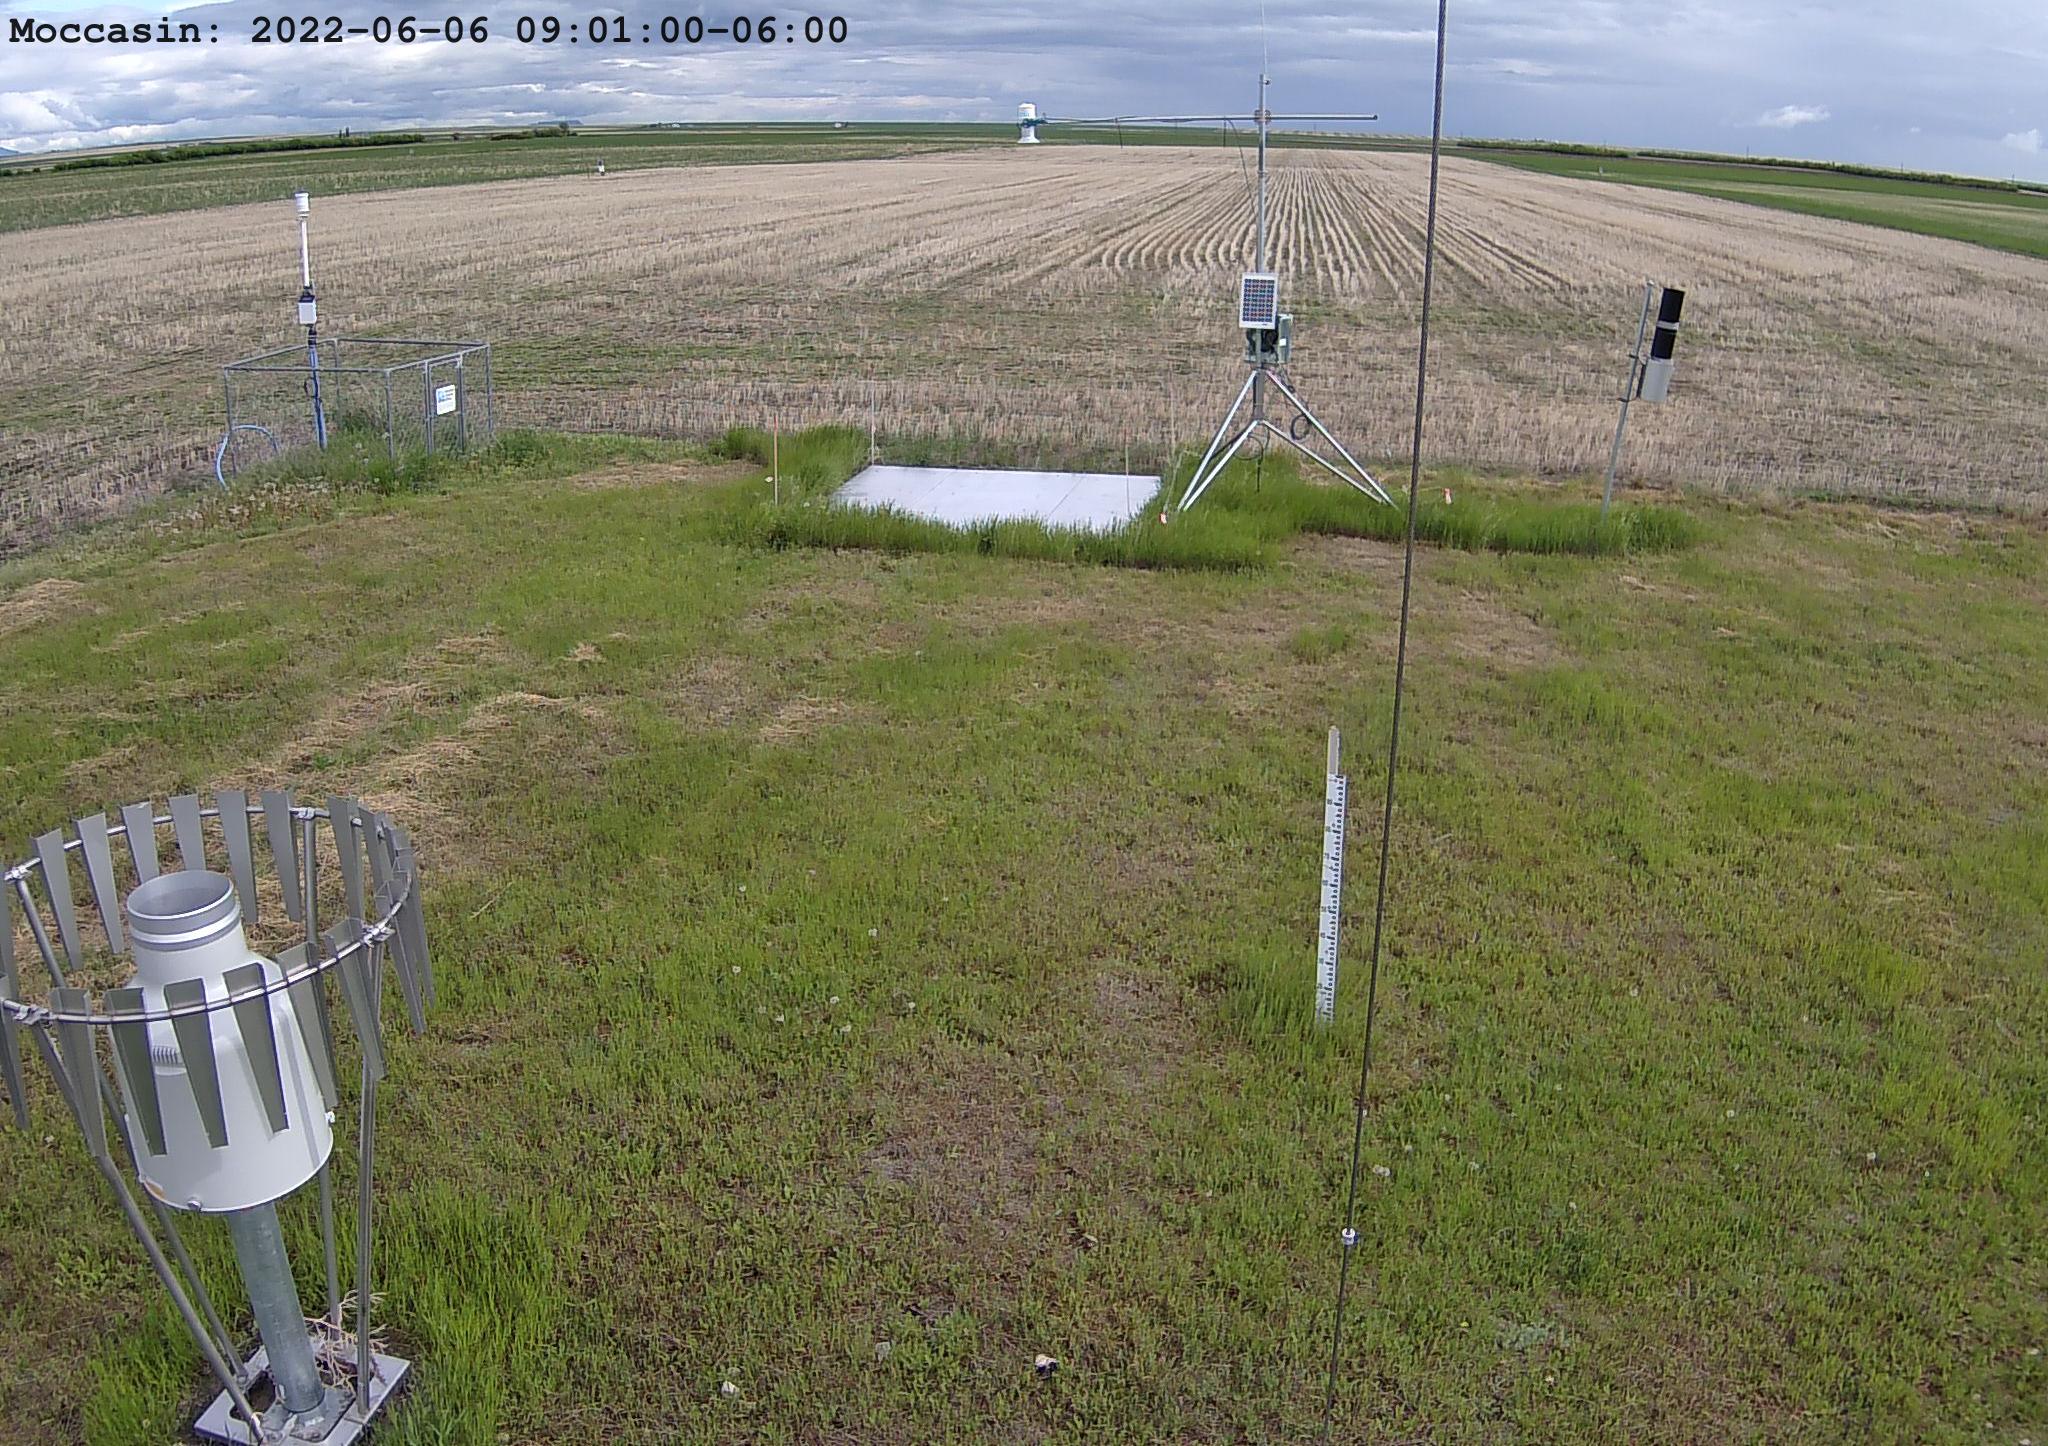 Montana Mesonet Moccasin Station, one of the newly retrofitted soil moisture and snowpack monitoring stations in the Upper Missouri River Basin project.